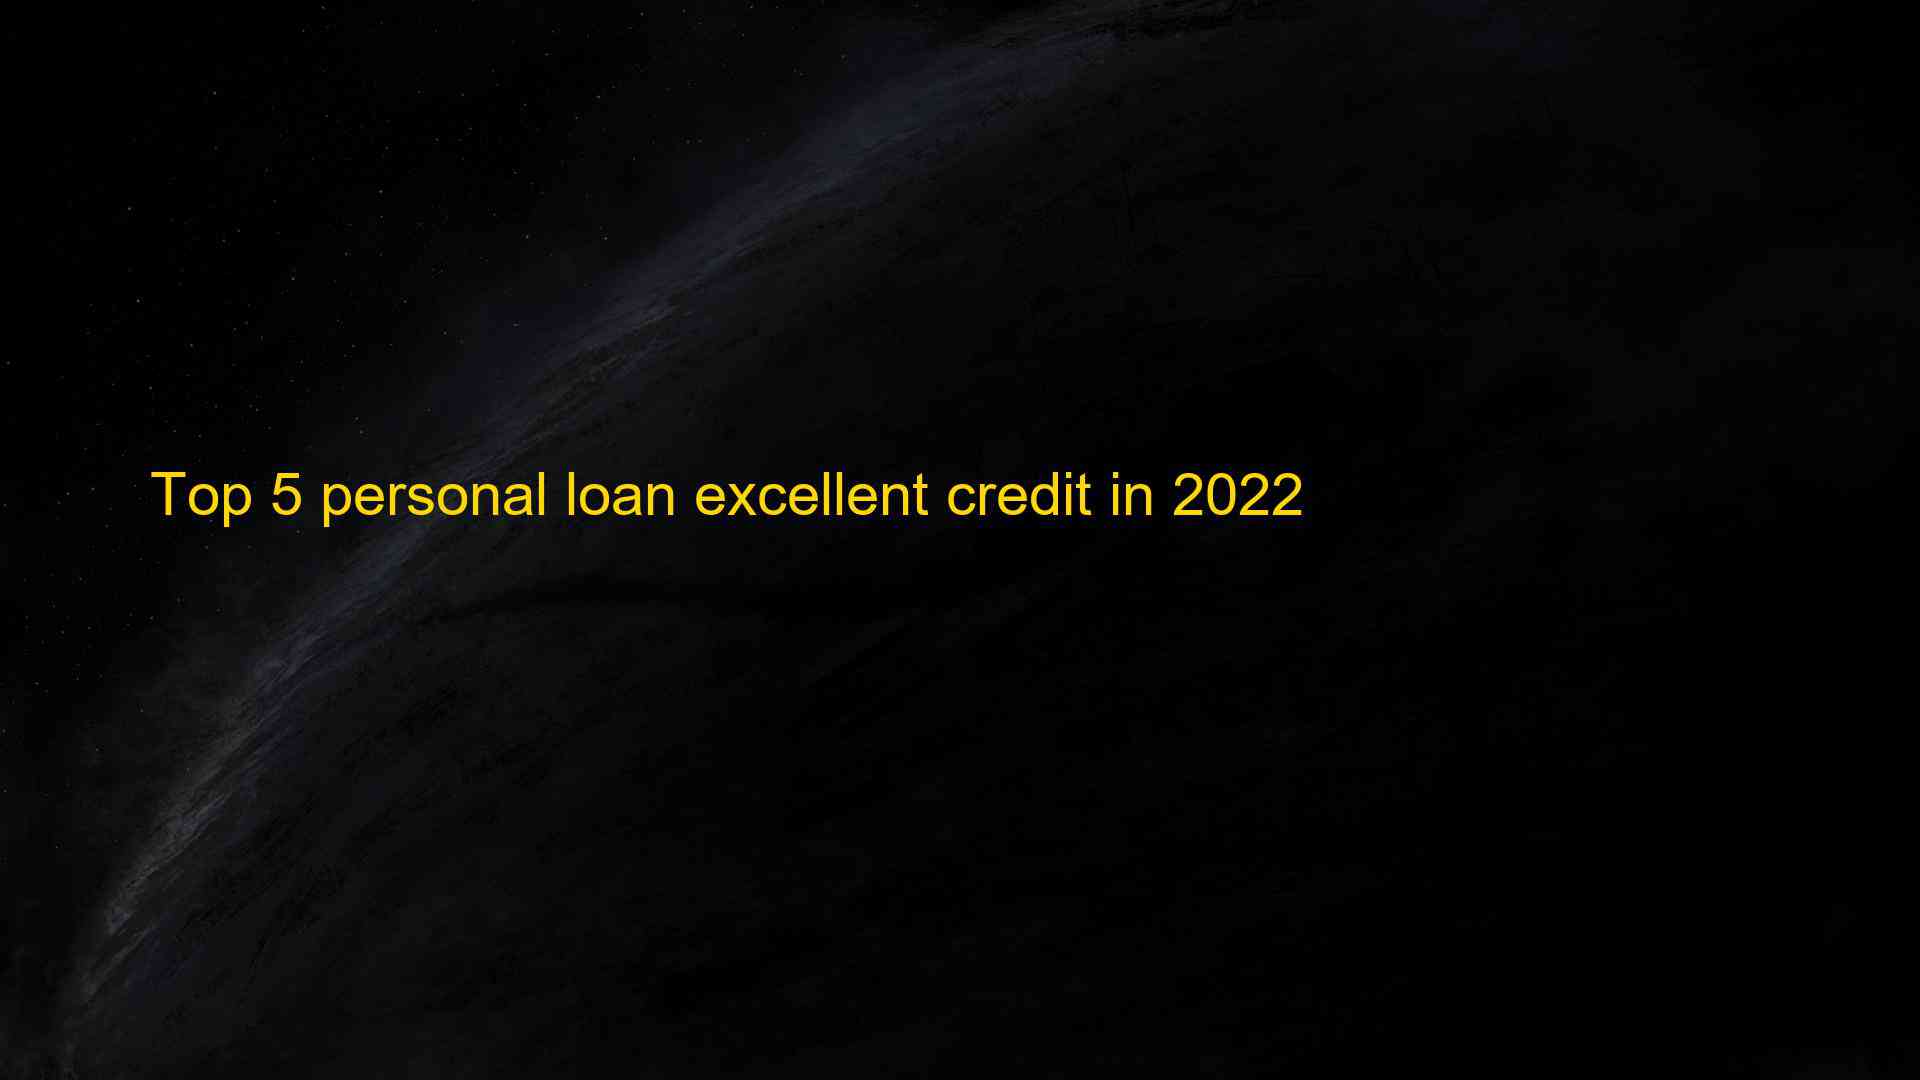 Top 5 personal loan excellent credit in 2022 1660245959